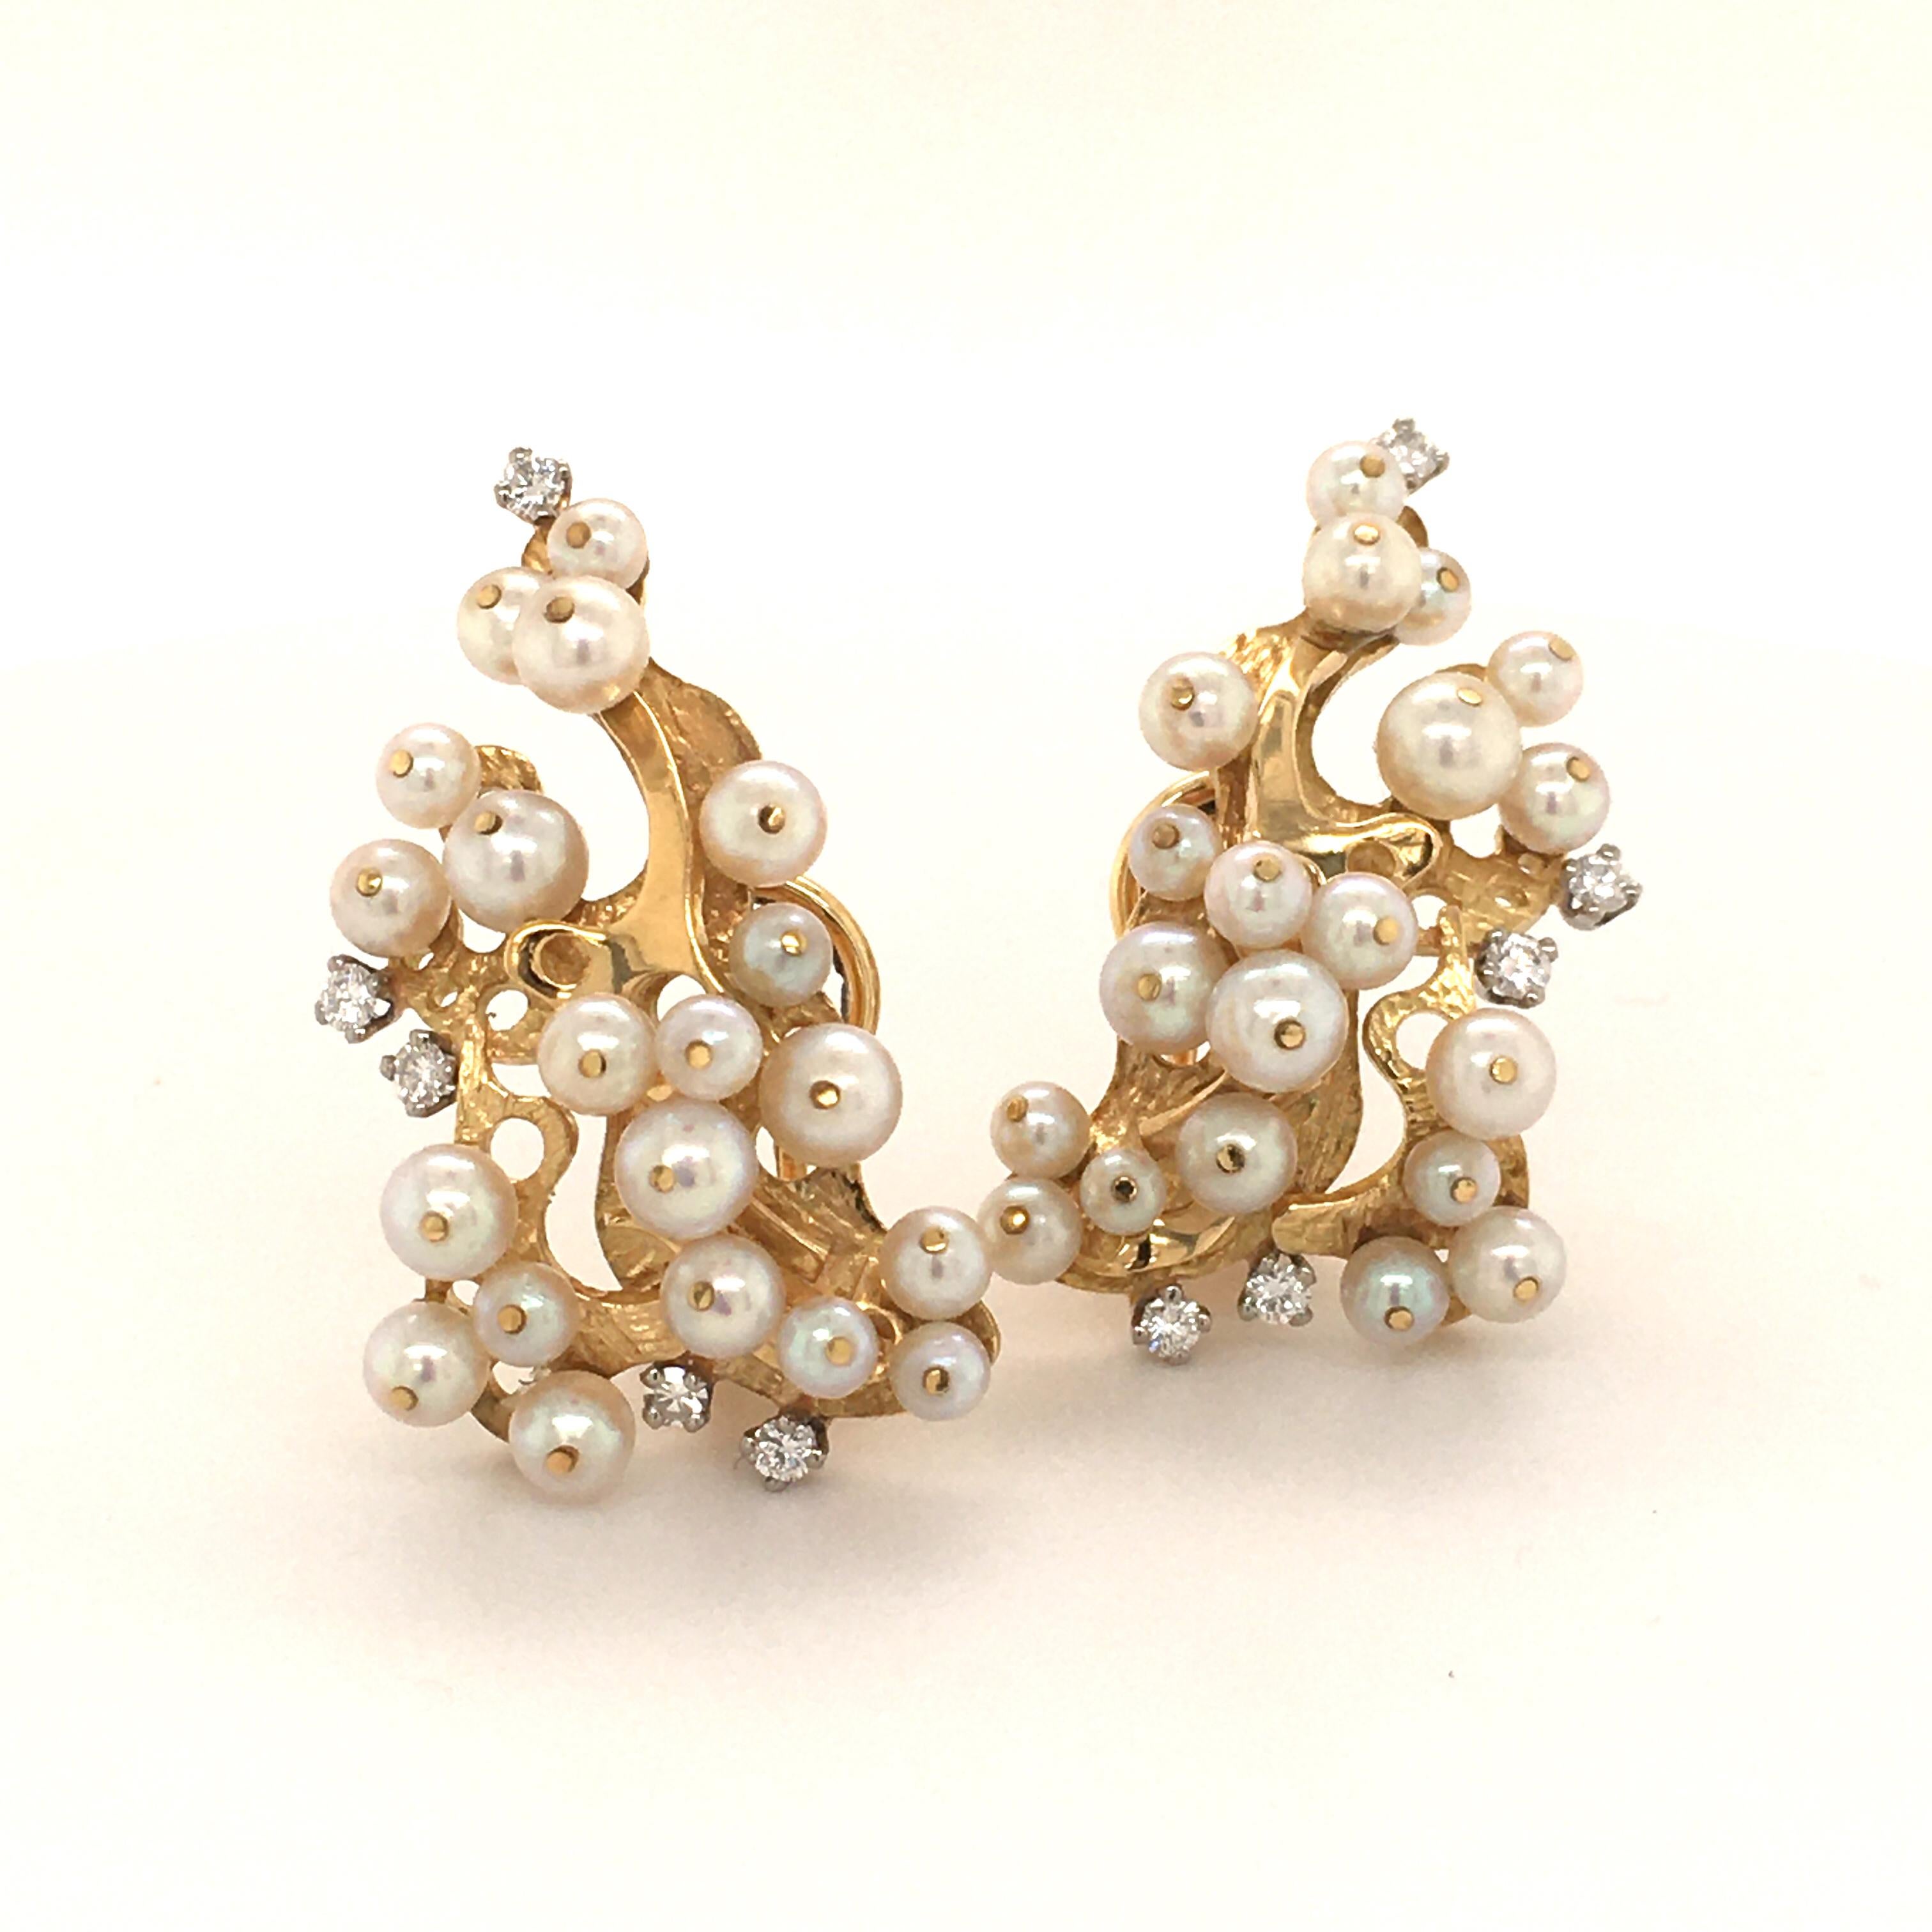 Fancy pair of earclips in yellow gold 750 set with 40 akoya cultured pearls, embellished with 10 brilliant cut diamonds totaling approx. 0.30 ct of G/H-vs quality.

Please, ask for additional pictures if you are interested in this item.

Weight: